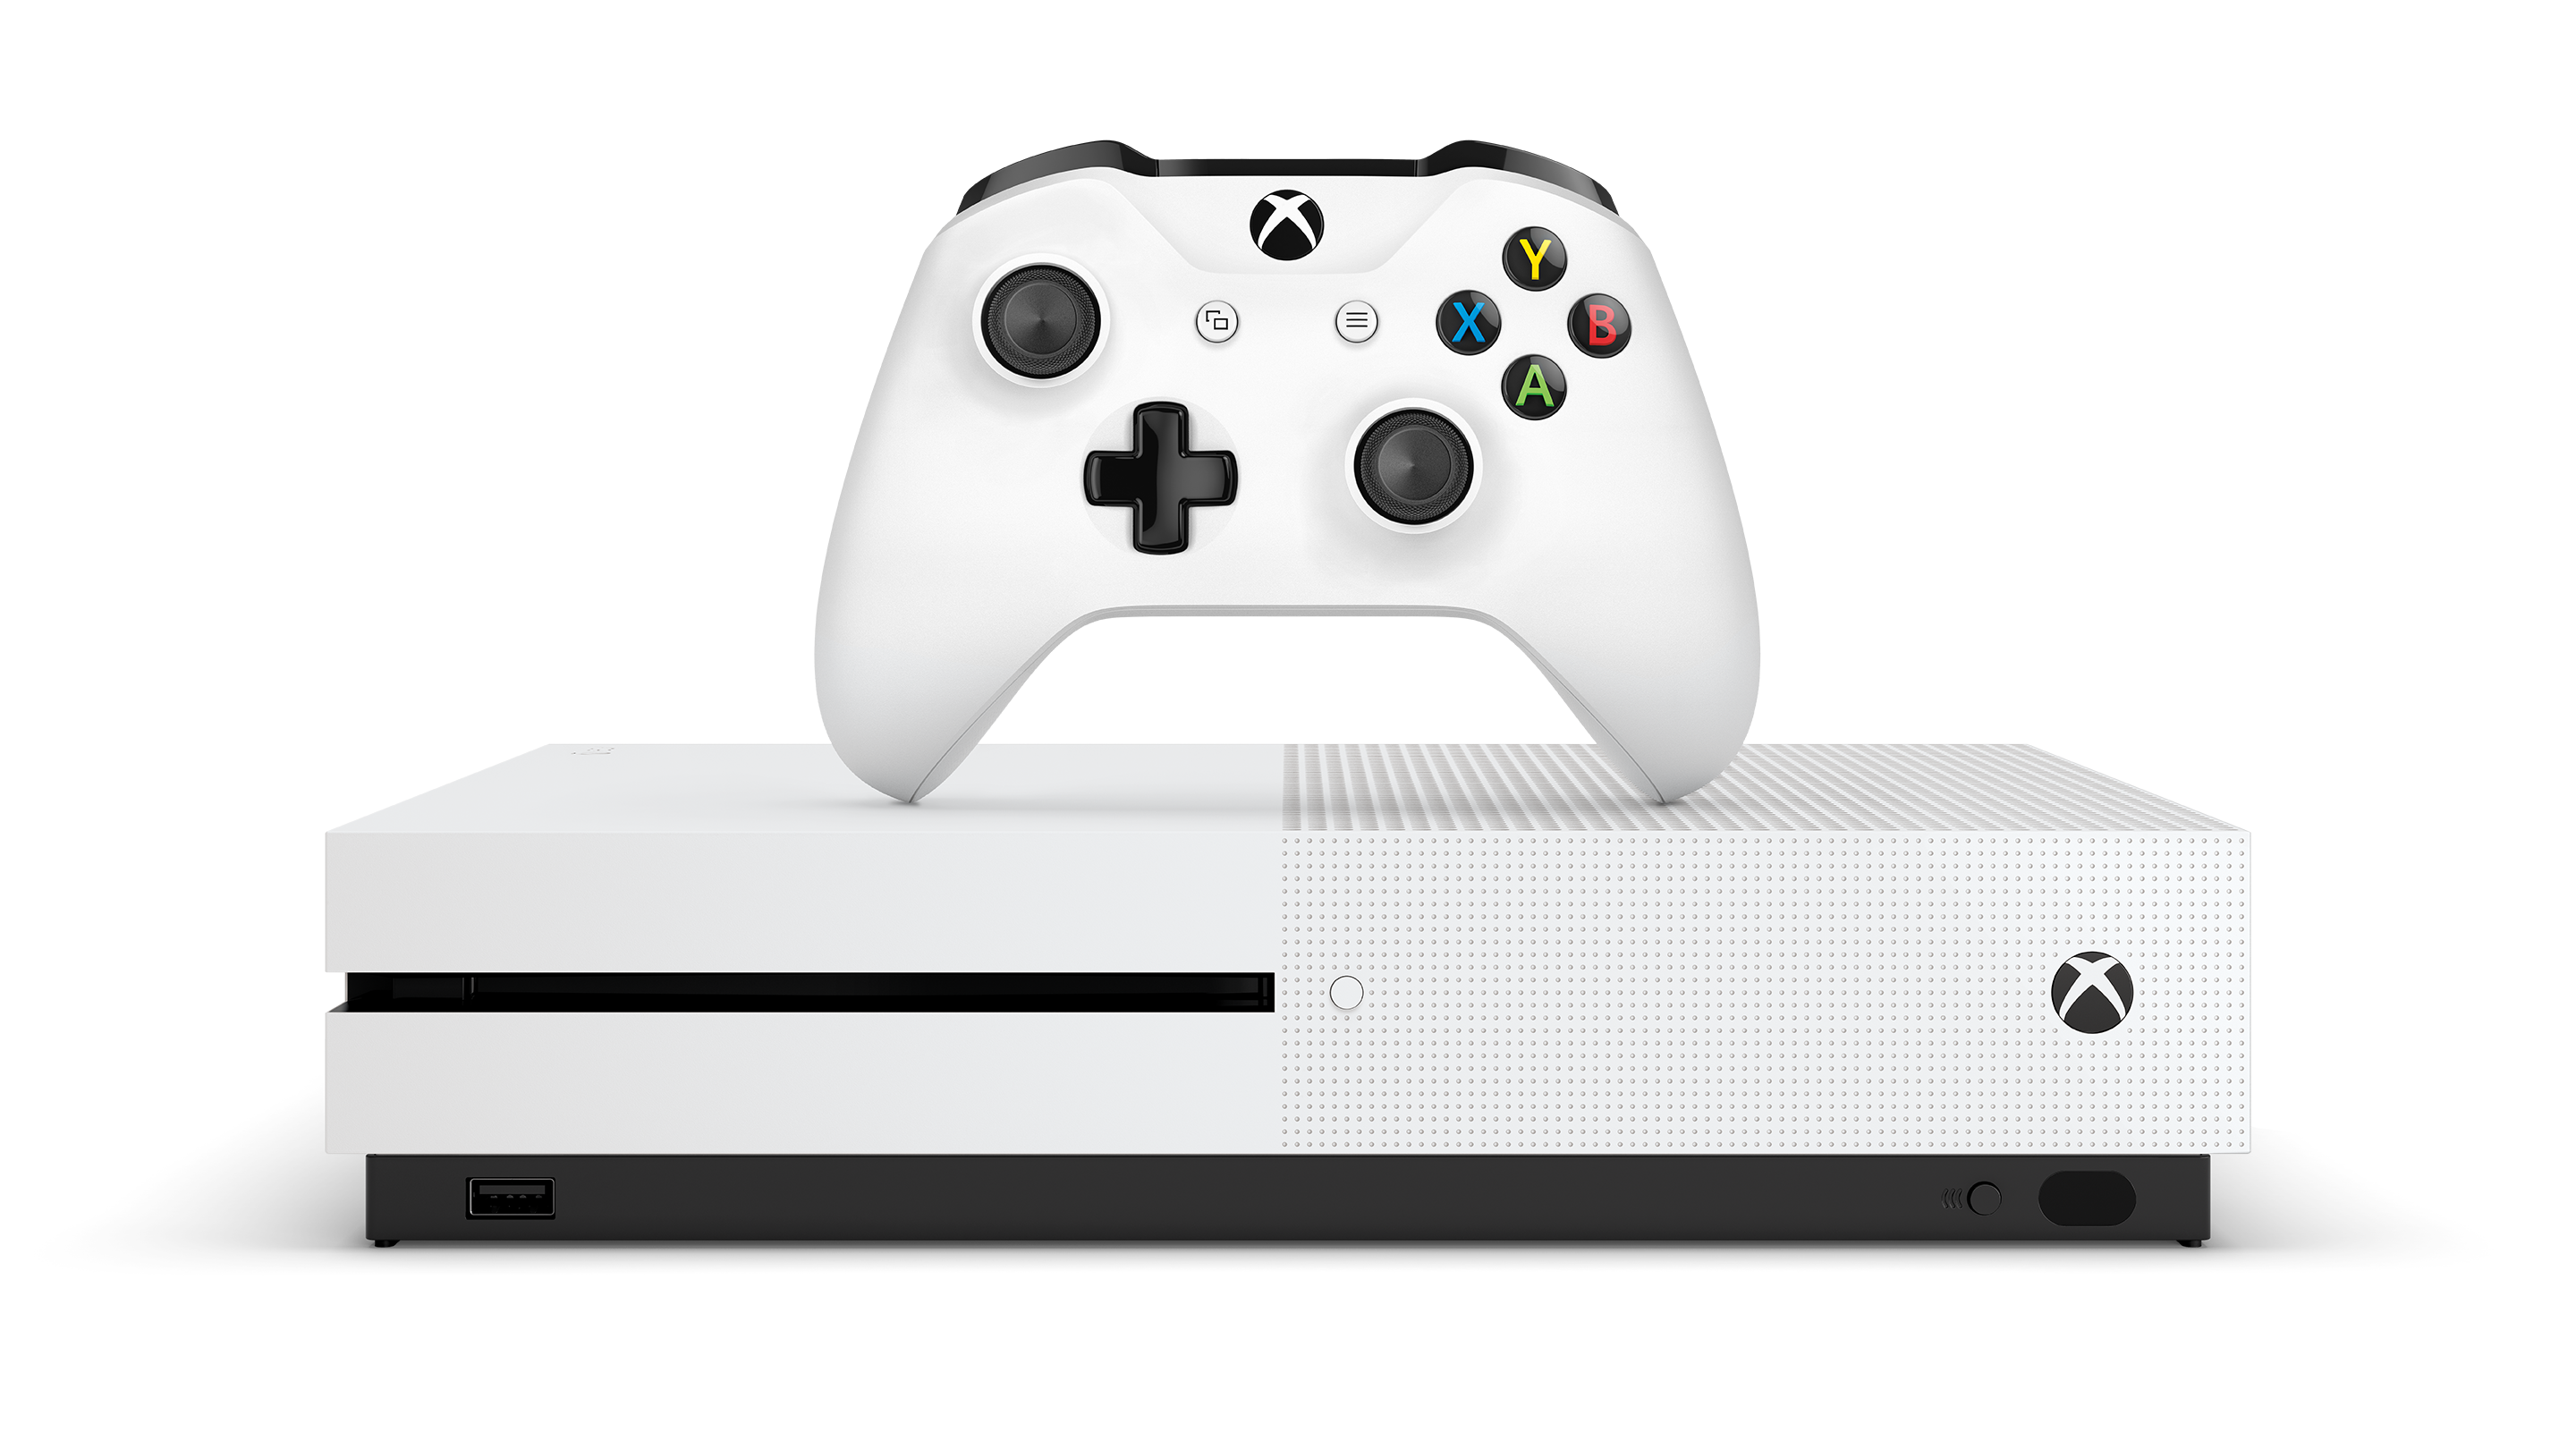 Xbox One S Arrives August 2 Xbox Wire